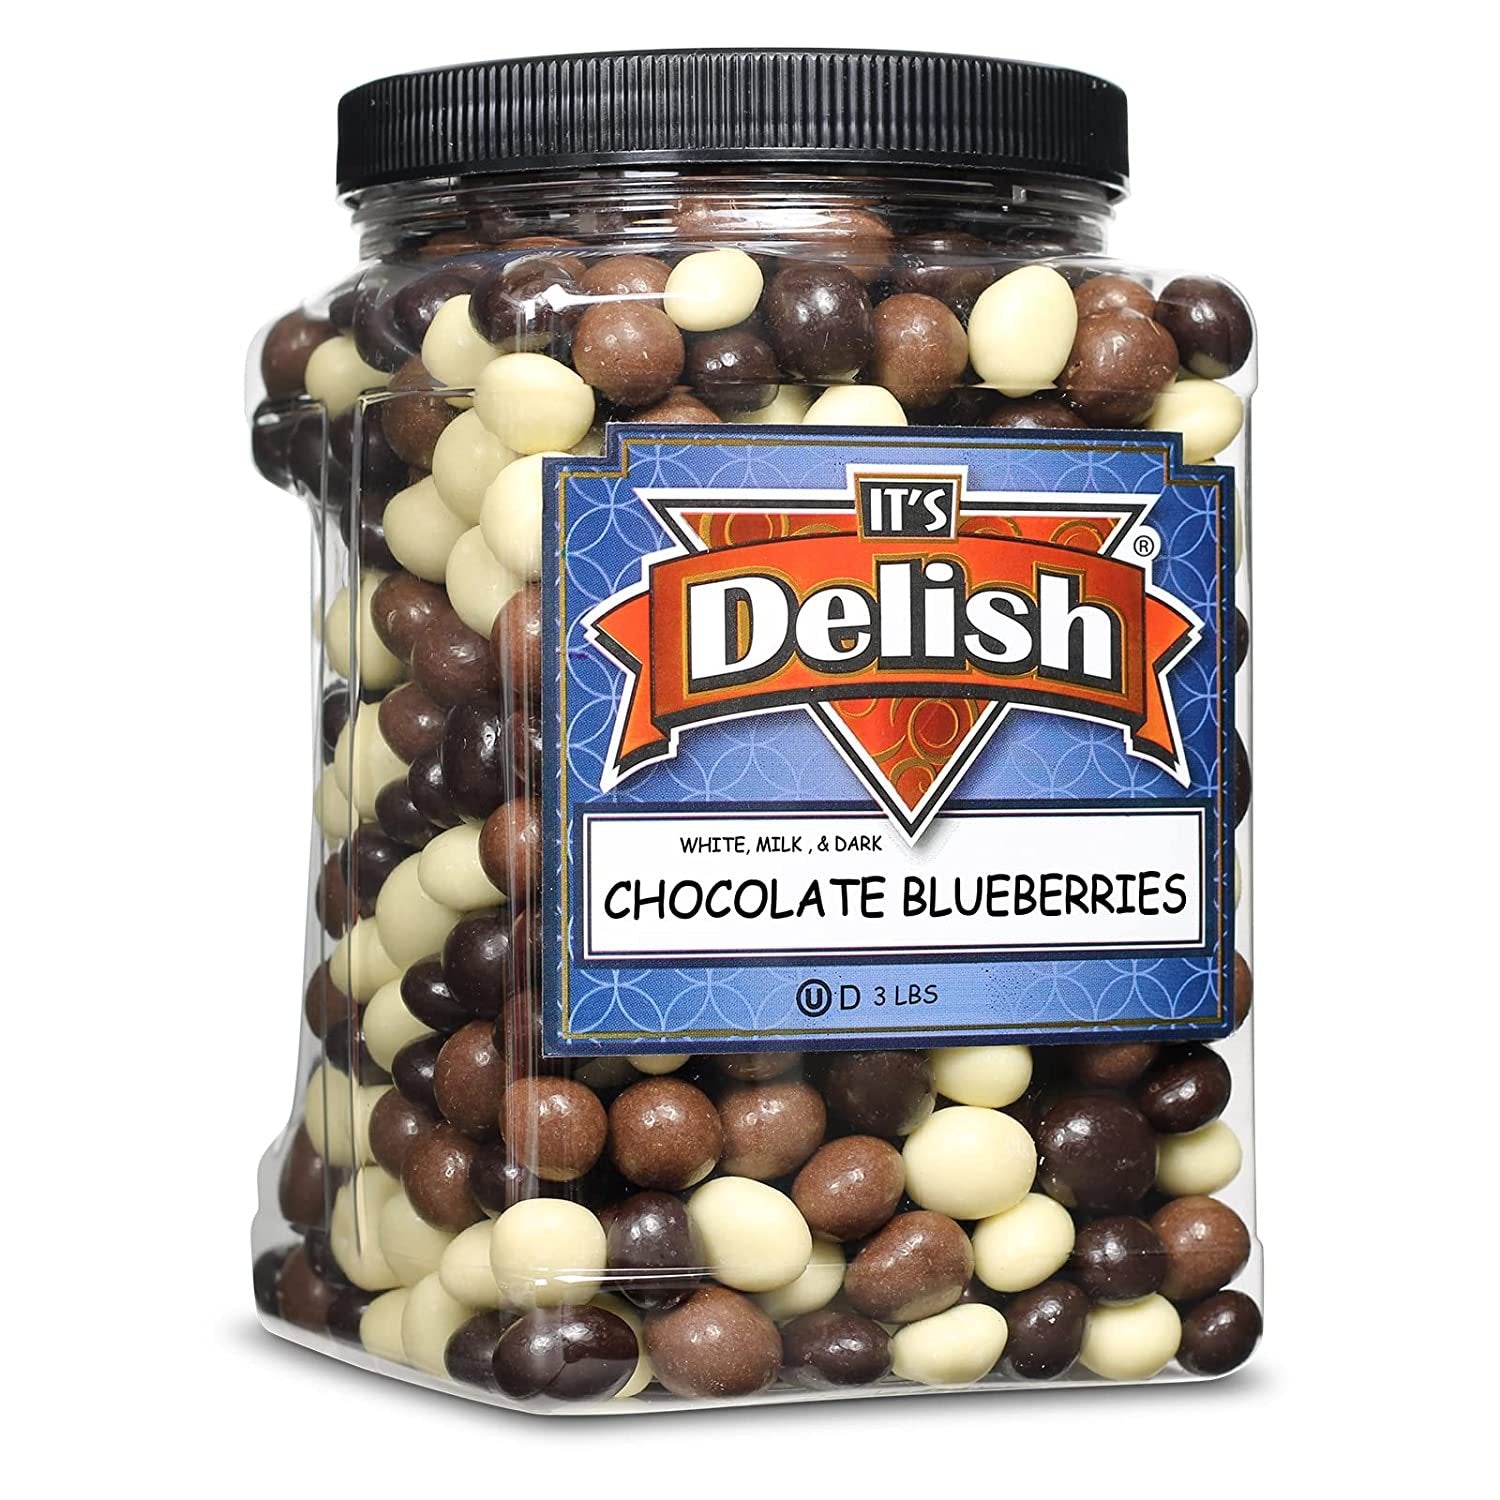 Gourmet Chocolate Blueberries Medley by Its Delish, 3 lbs Jumbo Reusable Container Jar Mix of Dark, Milk, and White Chocolate Covered Dried